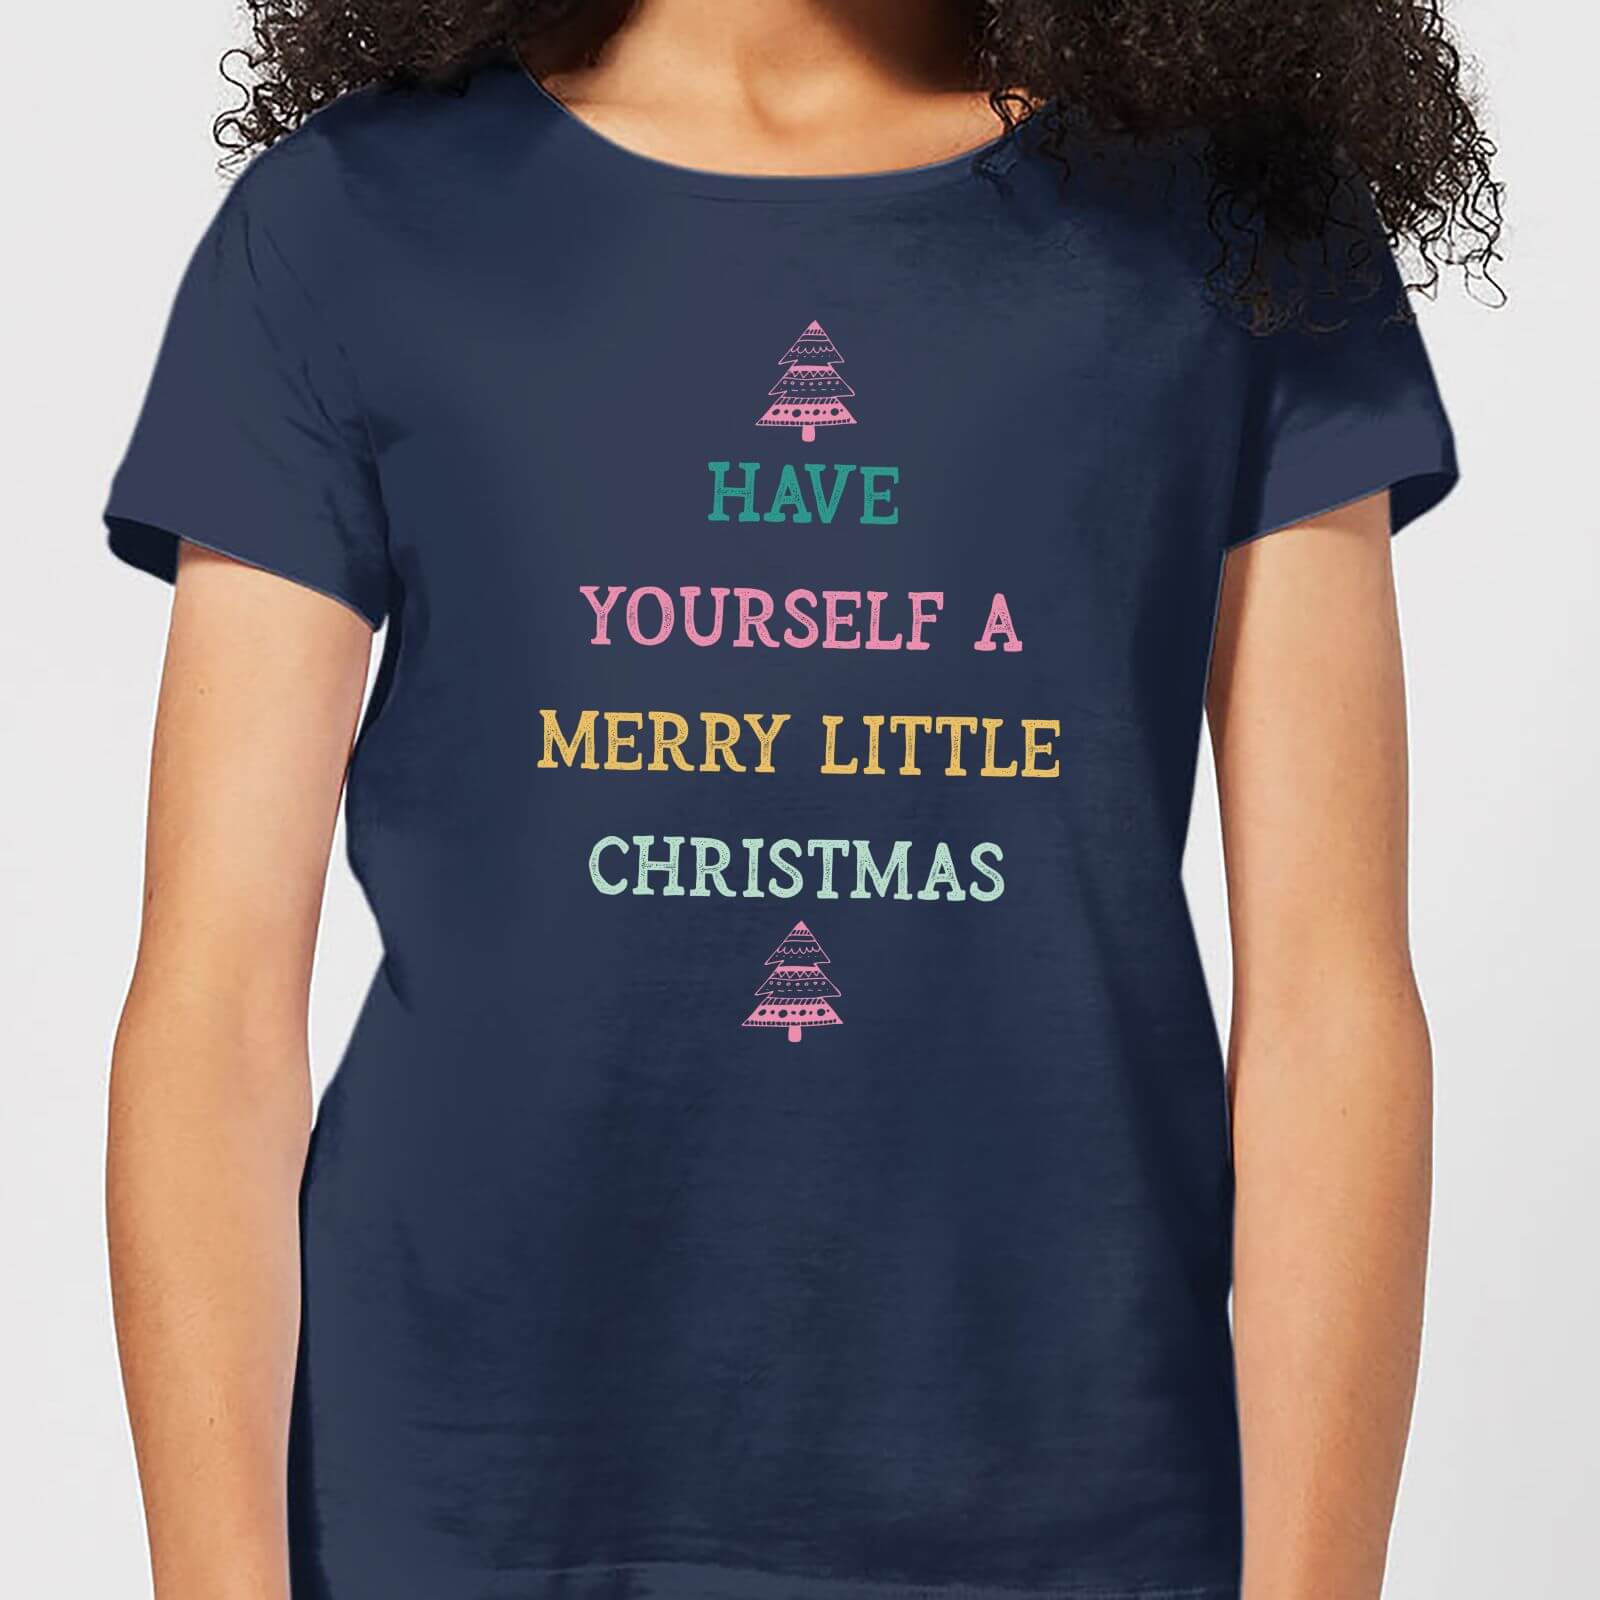 Have Yourself A Merry Little Christmas Women's Christmas T-Shirt - Navy - S - Navy